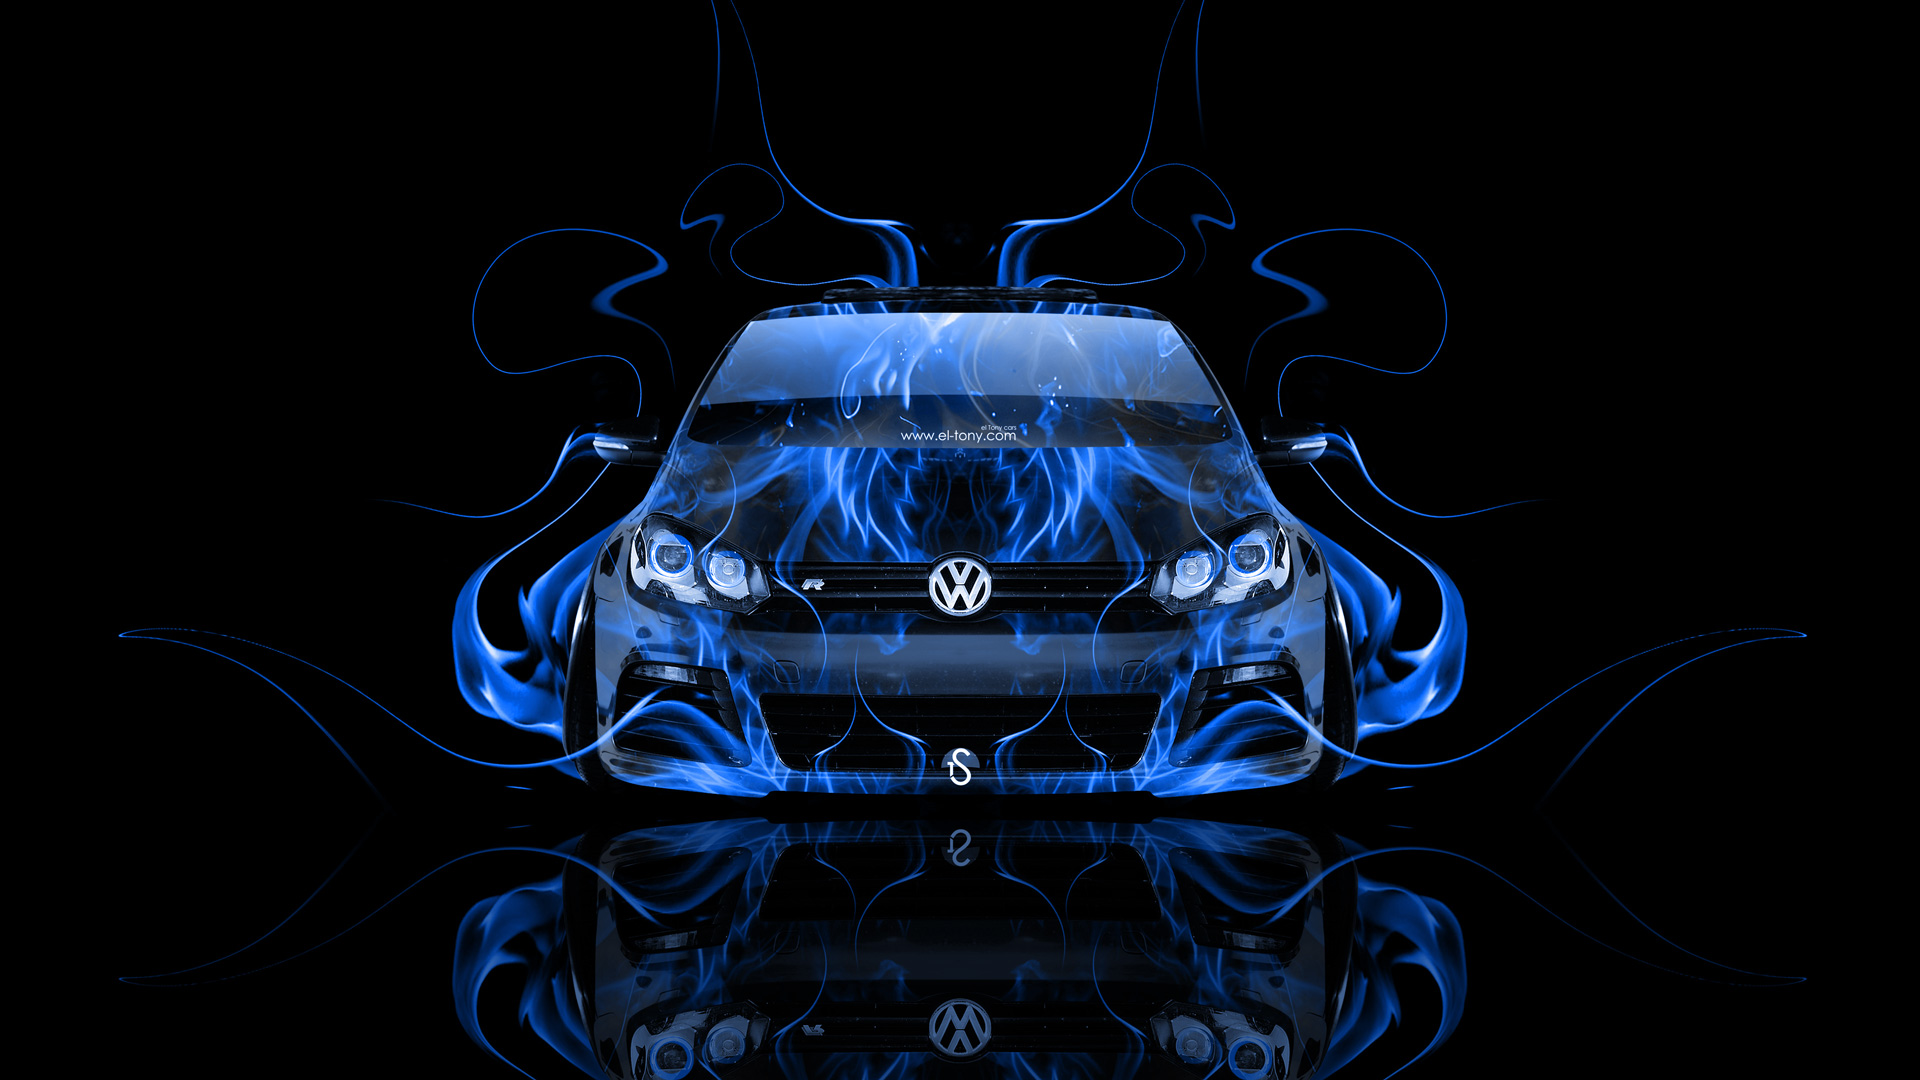 Volkswagen Golf R Front Blue Fire Abstract Car 2014 HD Wallpapers 1920x1080